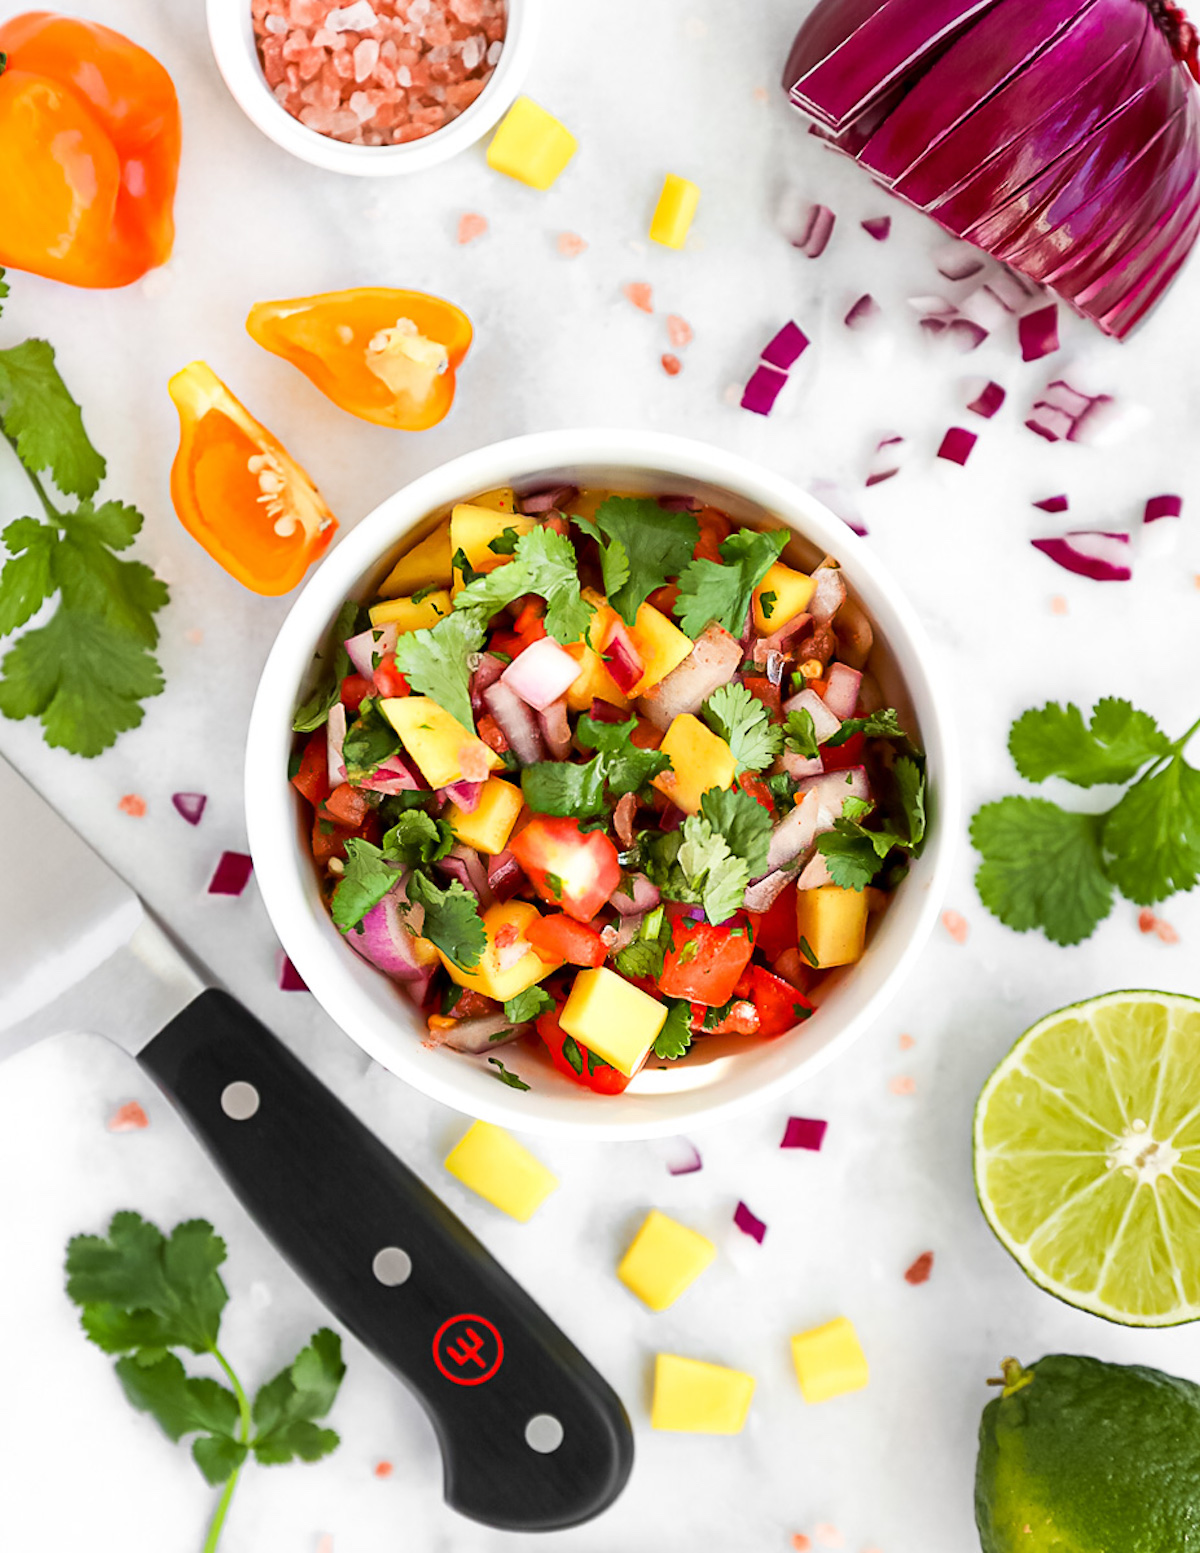 Pineapple mango salsa in a white bowl with the ingredients including: onion, salt, peppers, cilantro, mango, pineapple, and lime scattered around.